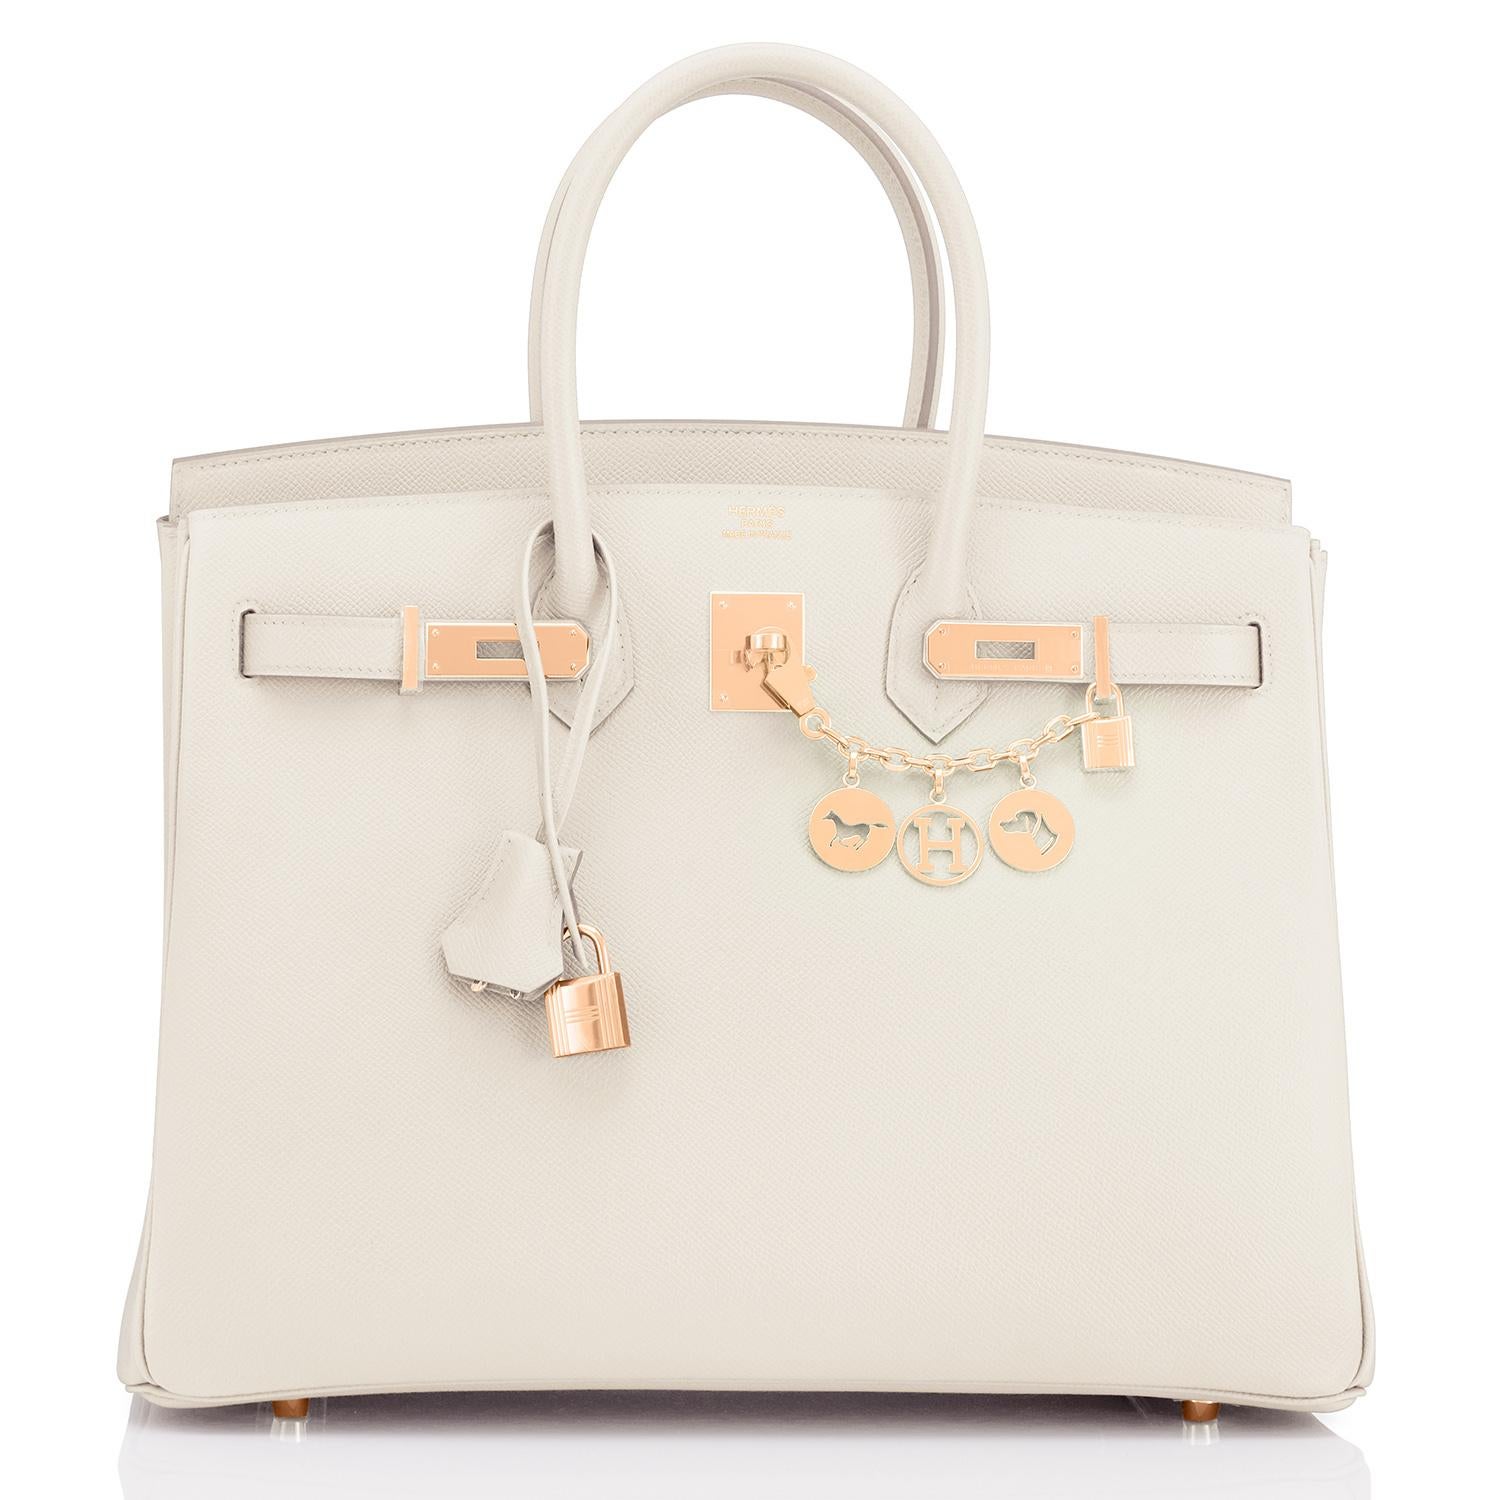 Hermes Craie 35cm Birkin Togo Rose Gold Hardware Chalk Off White Y Stamp, 2020 RARE
Craie Birkin 35cm with Rose Gold is so spectacular and ultra rare!
Just purchased from Hermes store; bag bears new interior 2020 Y Stamp.
Brand New in Box. Store